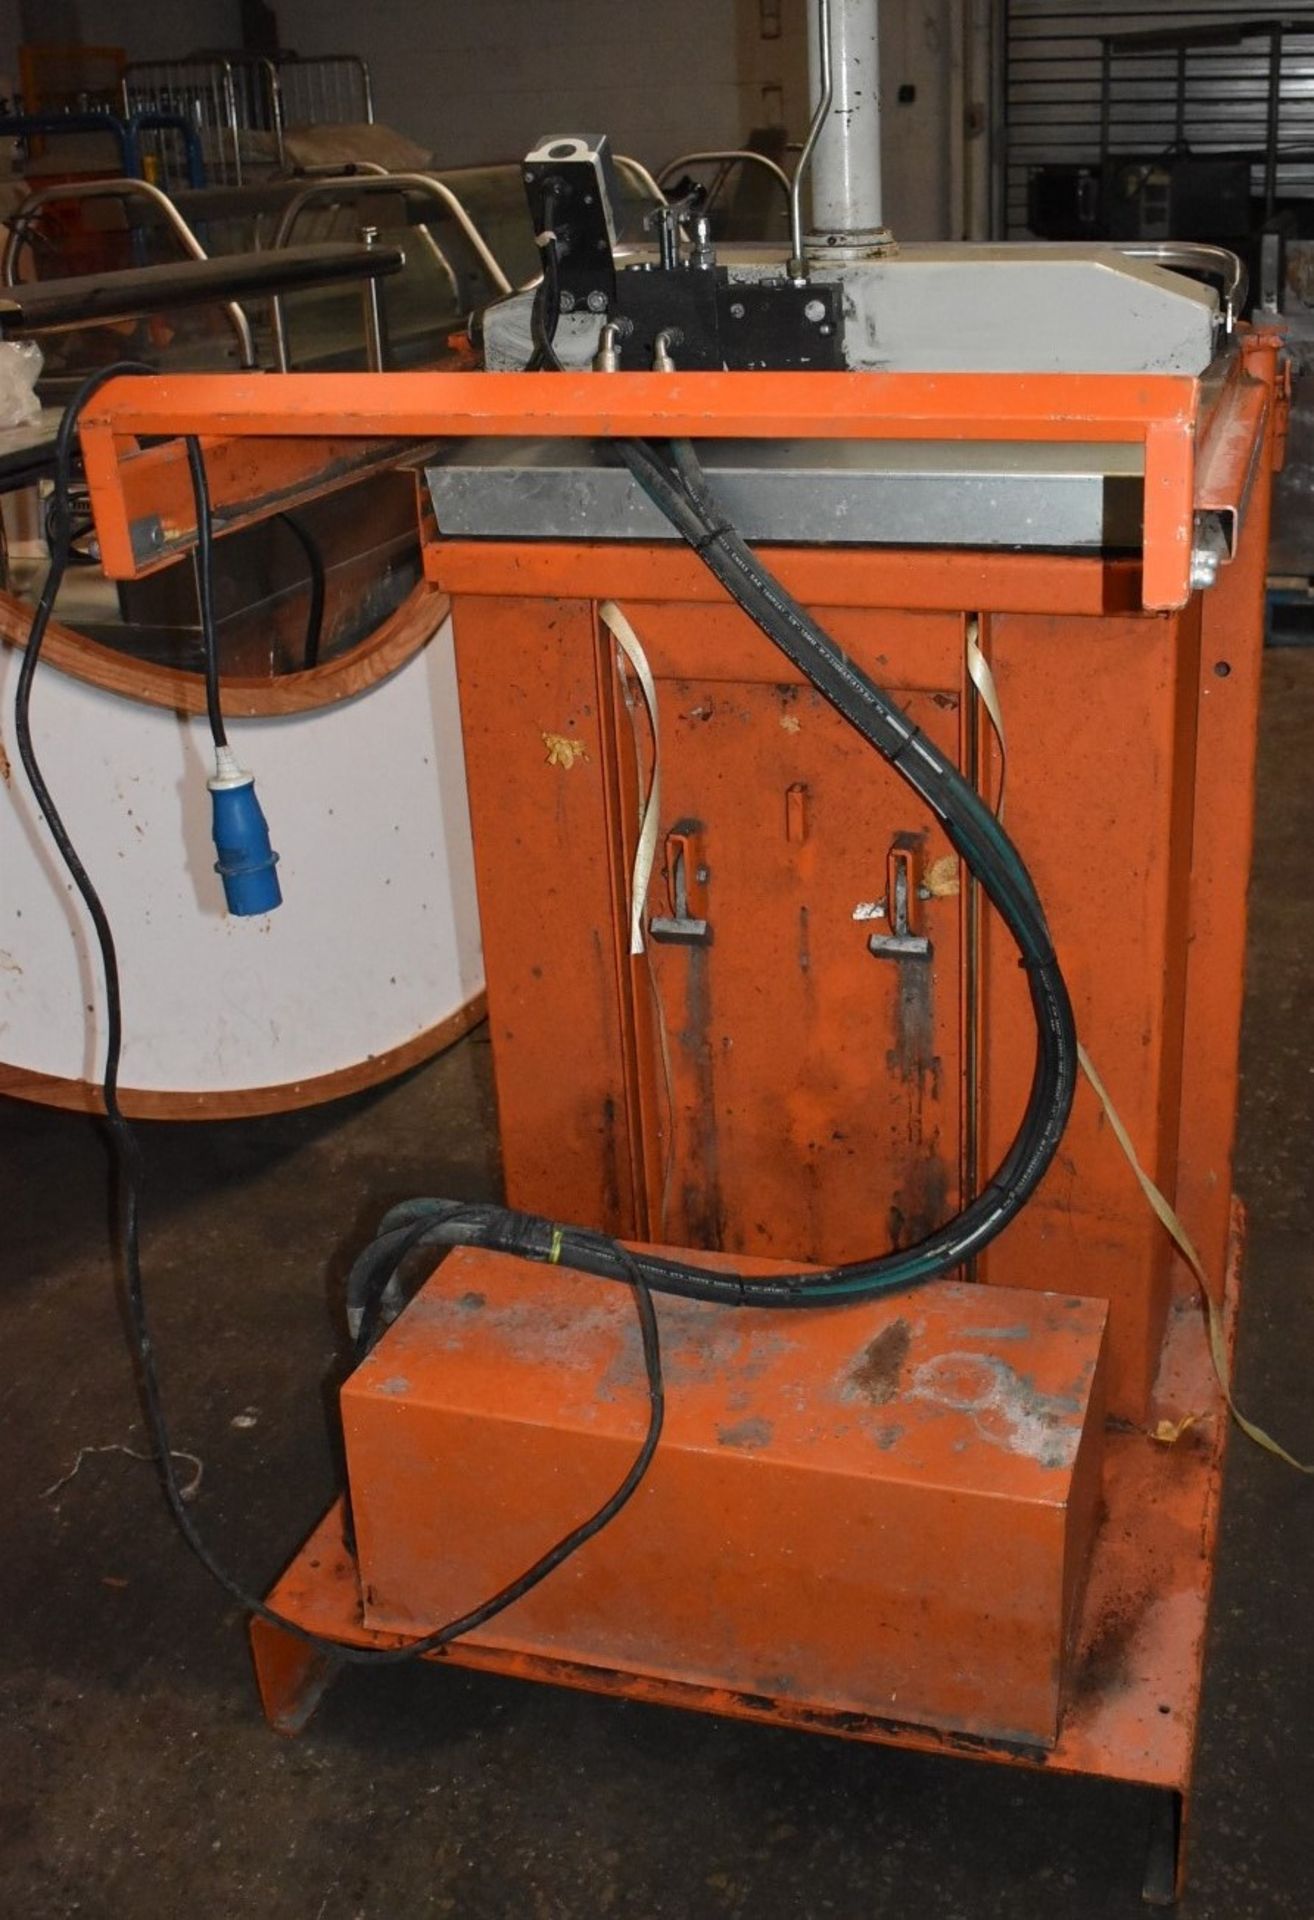 1 x Orwak 5010 Hydraulic Press Compact Cardboard Baler - Used For Compacting Recyclable or Non- - Image 15 of 15